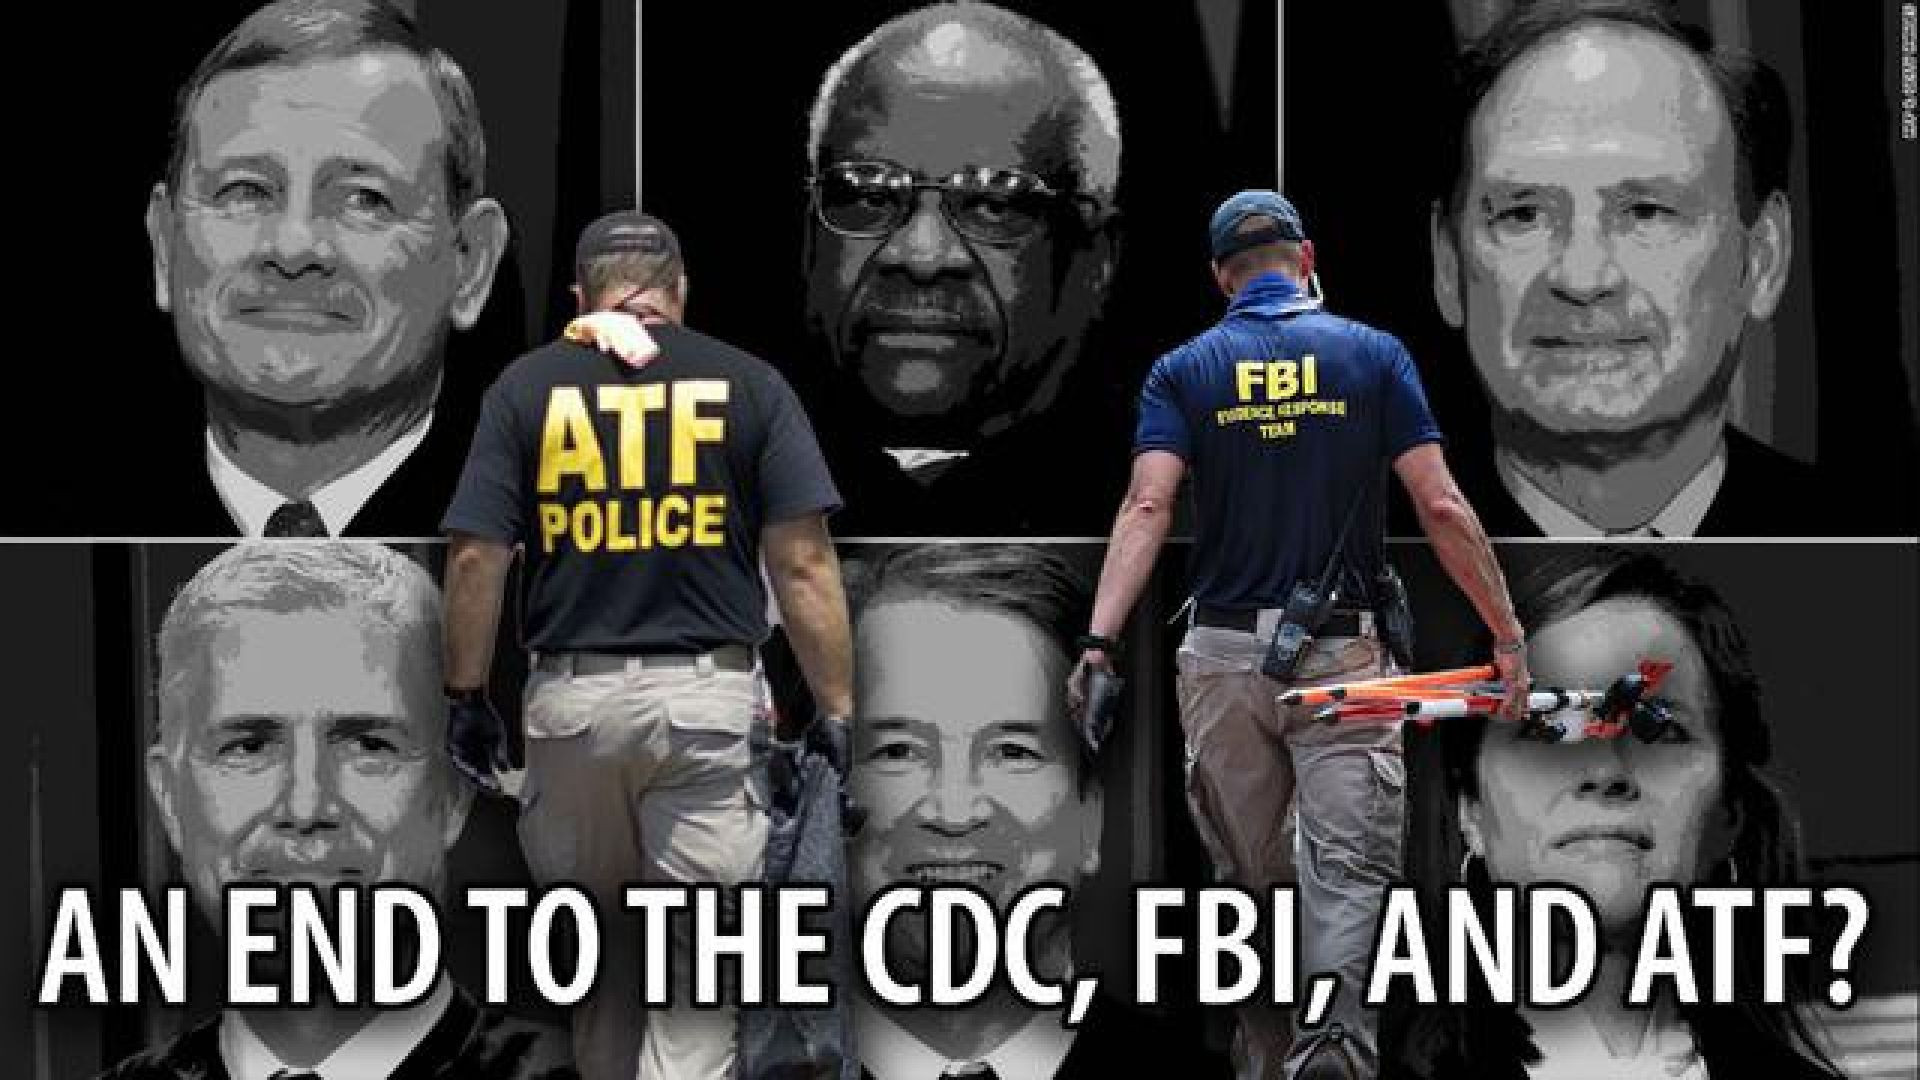 ⁣RECENT SCOTUS RULING COULD BRING AN END TO THE POWER OF CDC, FBI, AND ATF